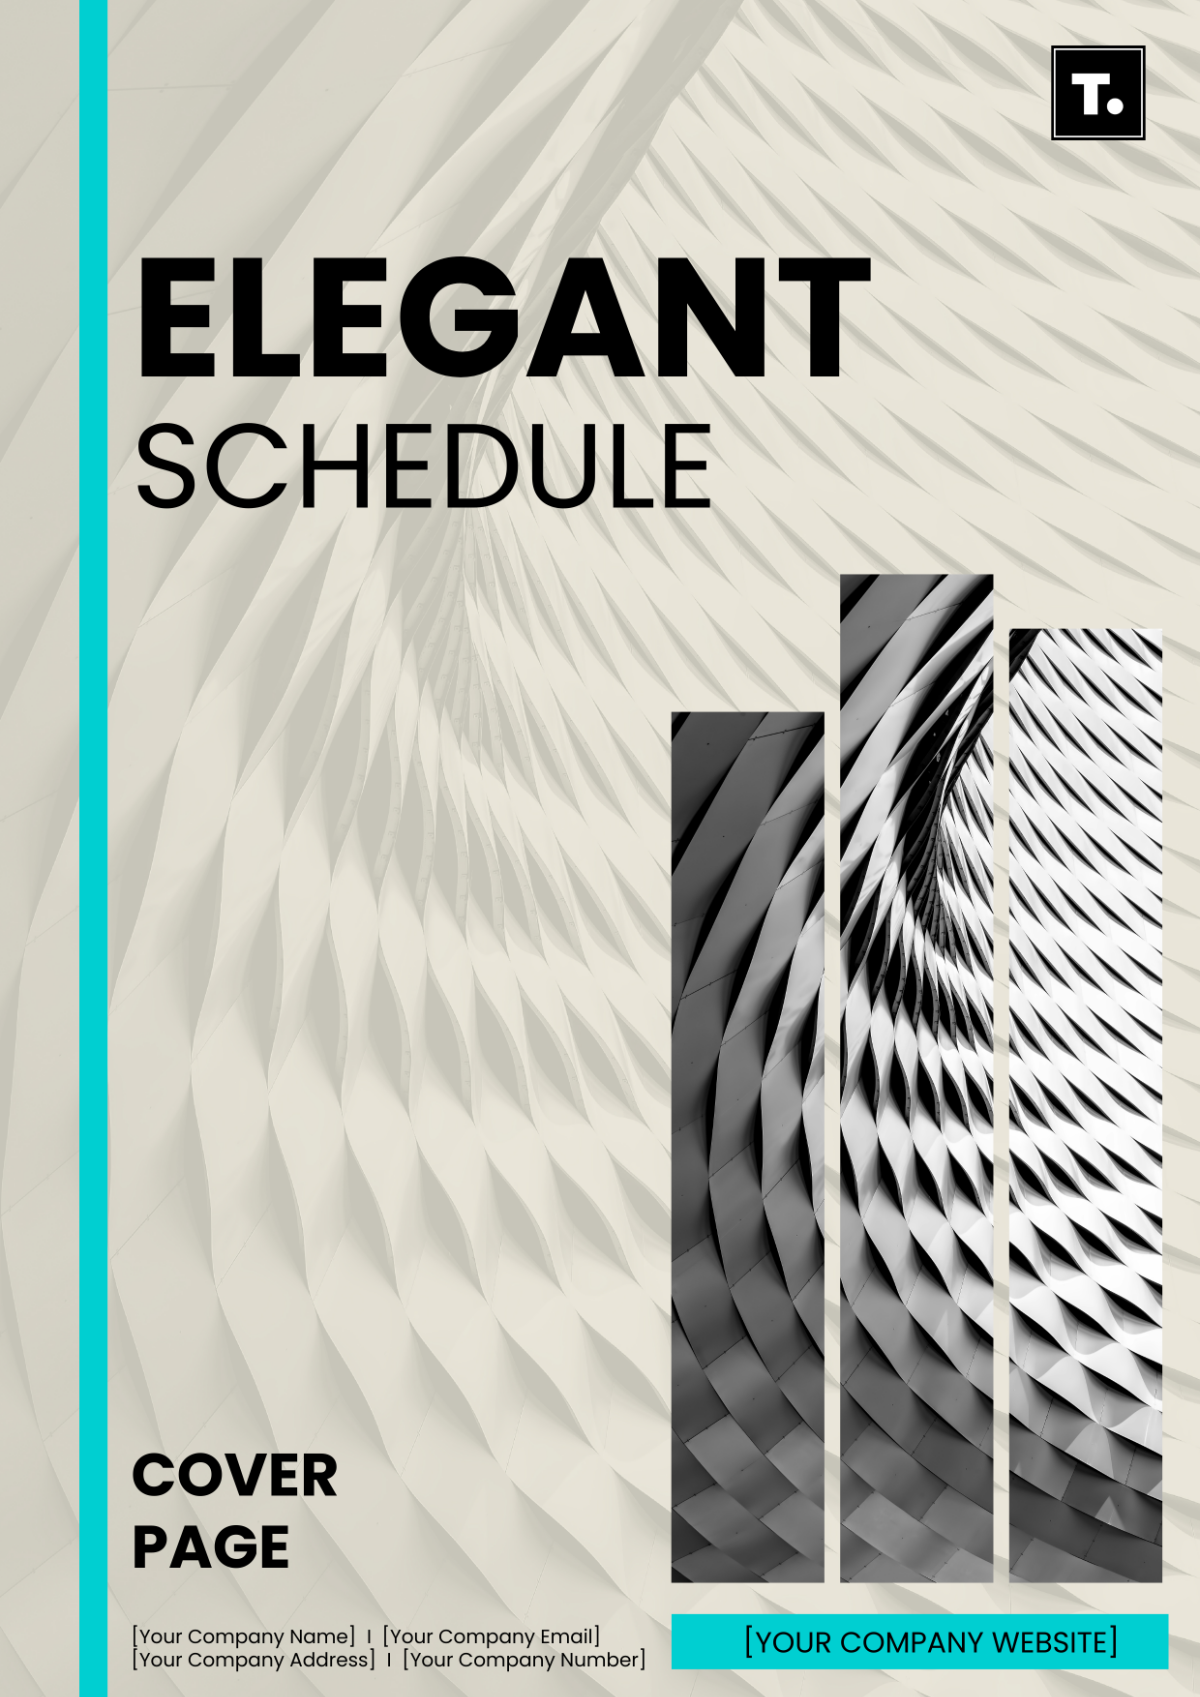 Elegant Schedule Cover Page